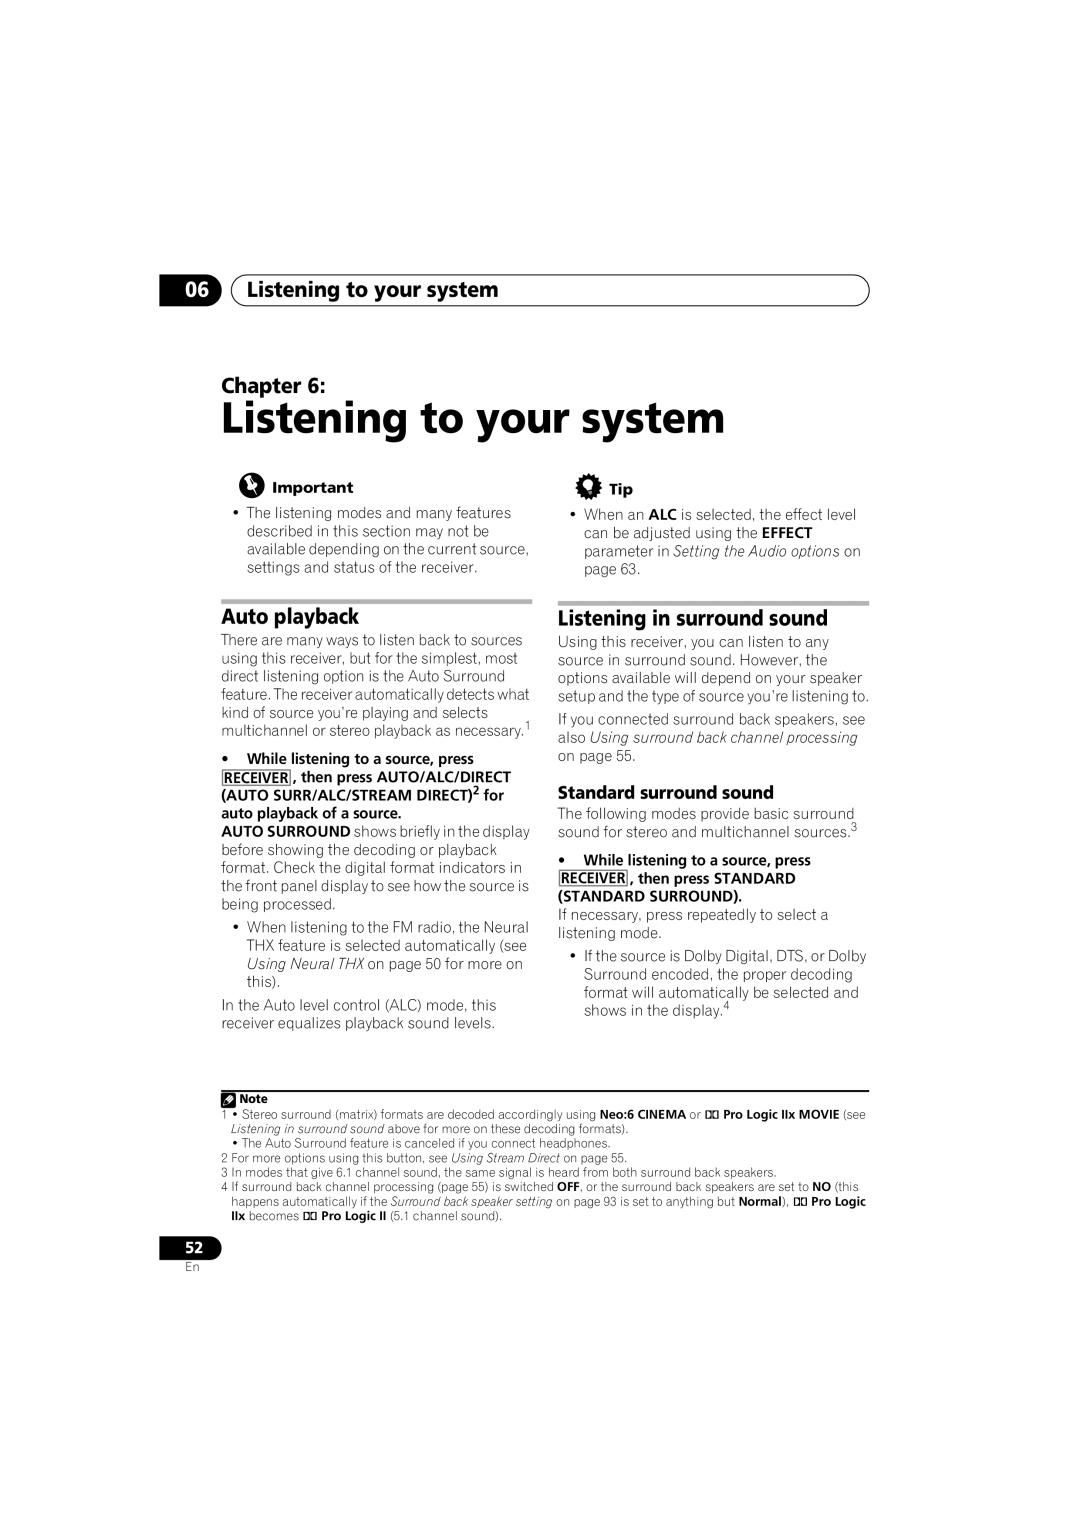 Pioneer VSX-919AH-S manual 06Listening to your system Chapter, Auto playback, Listening in surround sound 